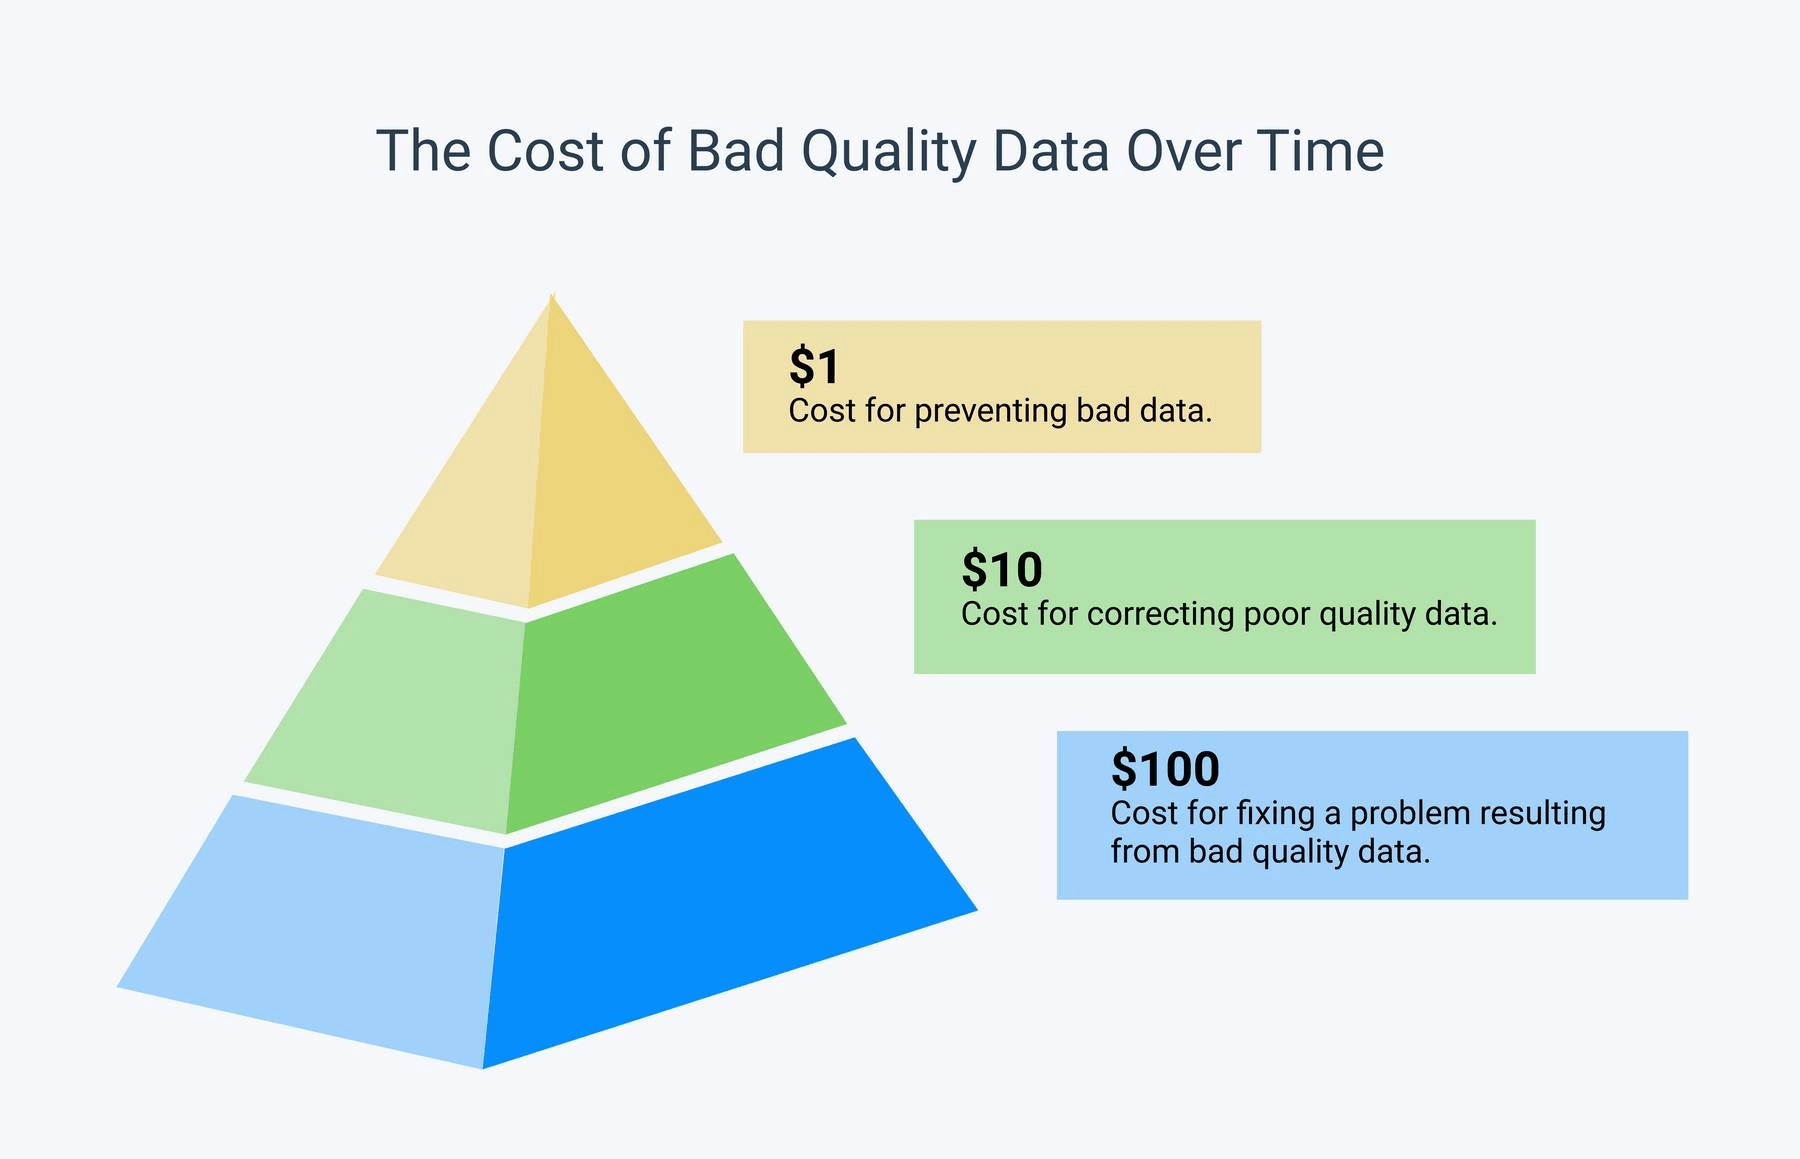 The cost of bad data quality over time is significantly higher the longer you wait to clean.